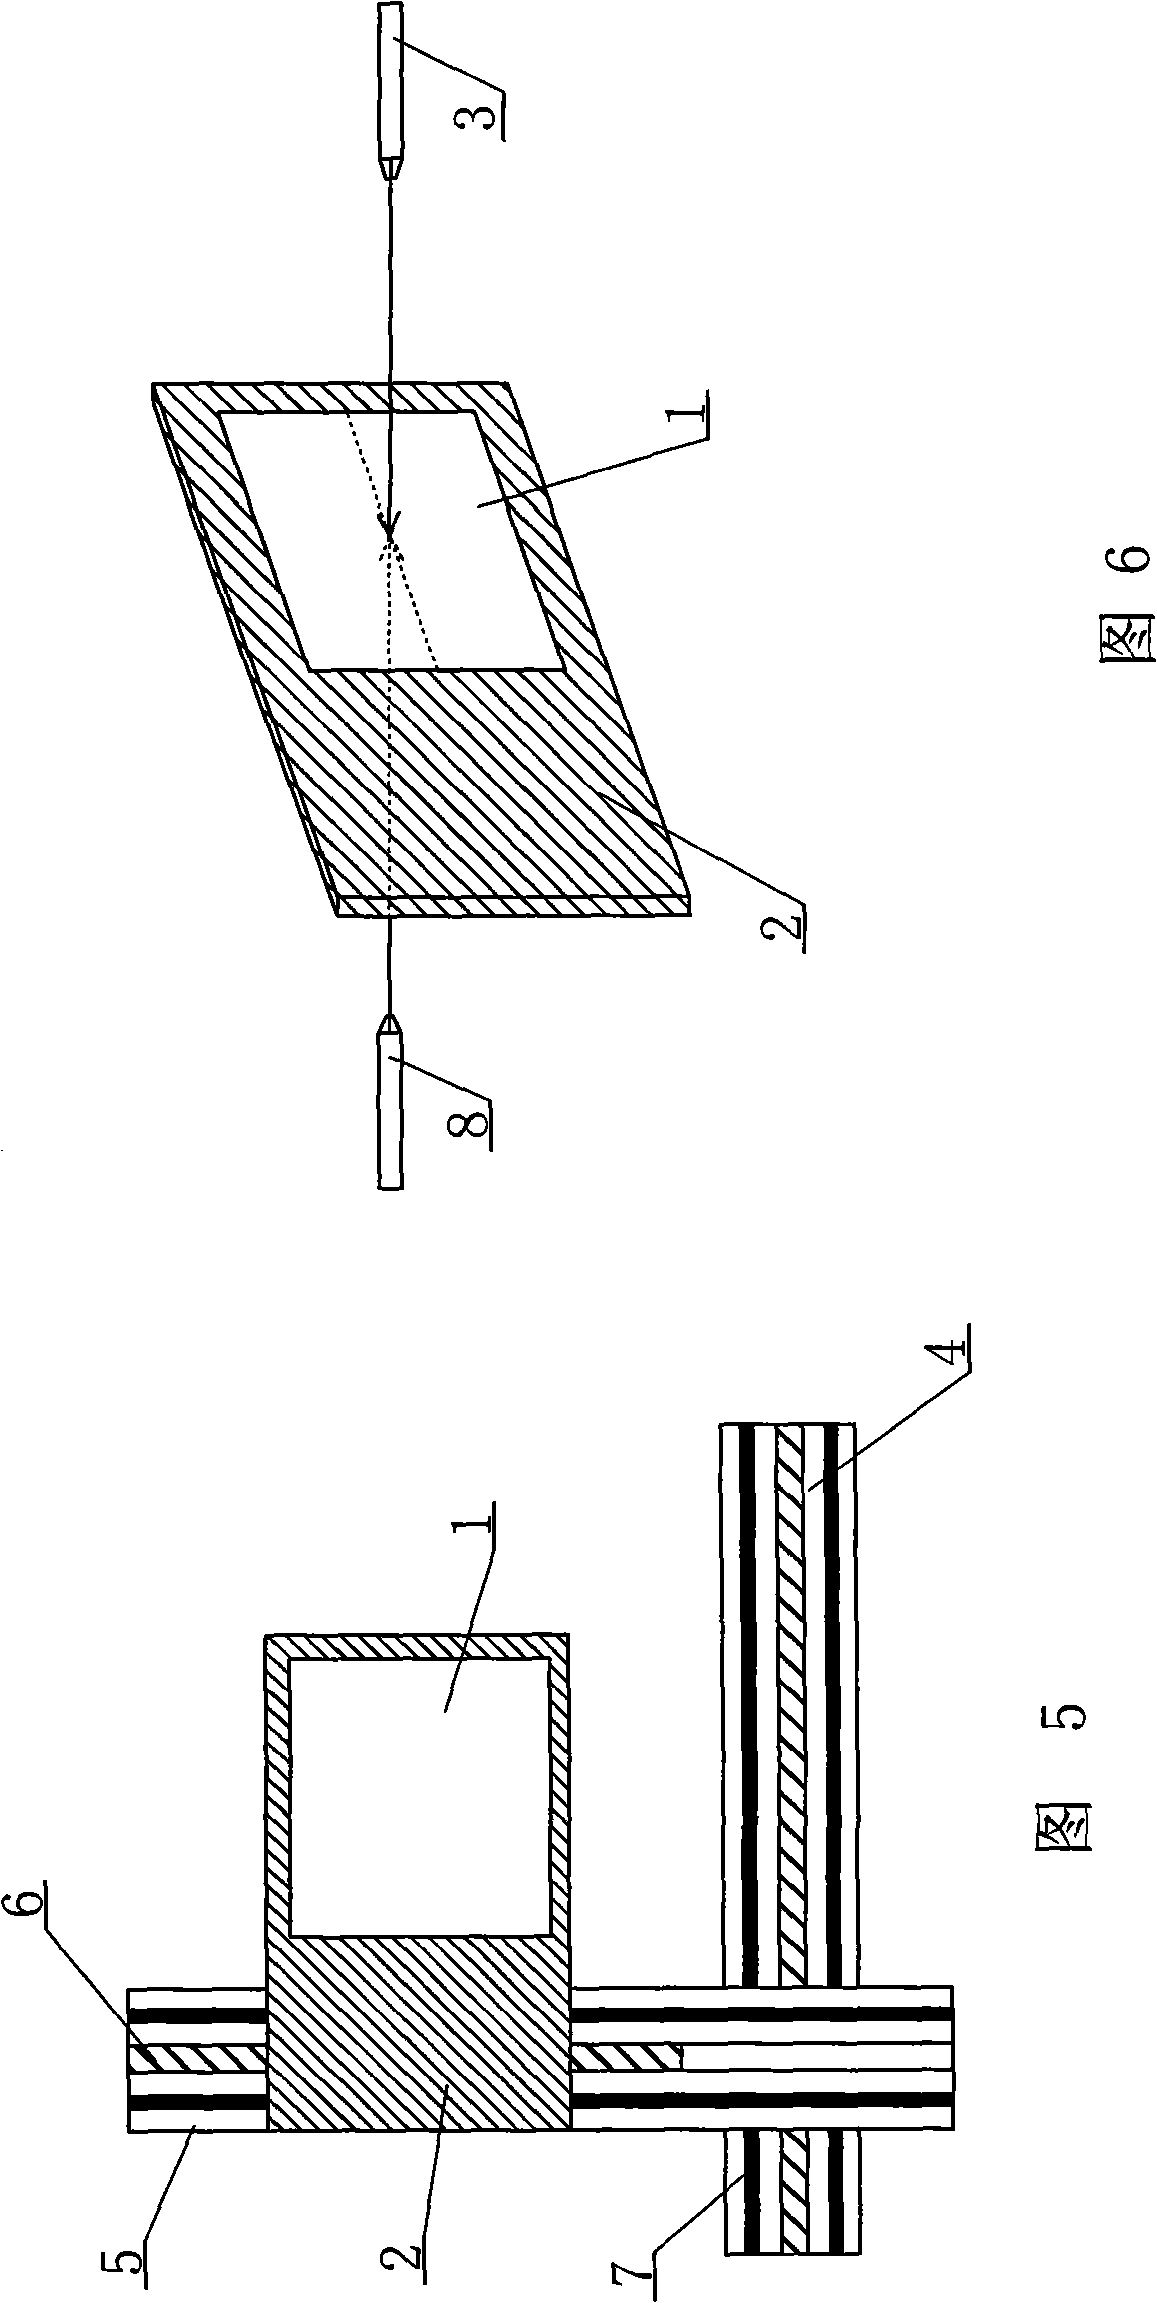 Scribing method for brittlement substrate web with precision laser and special-purpose equipment